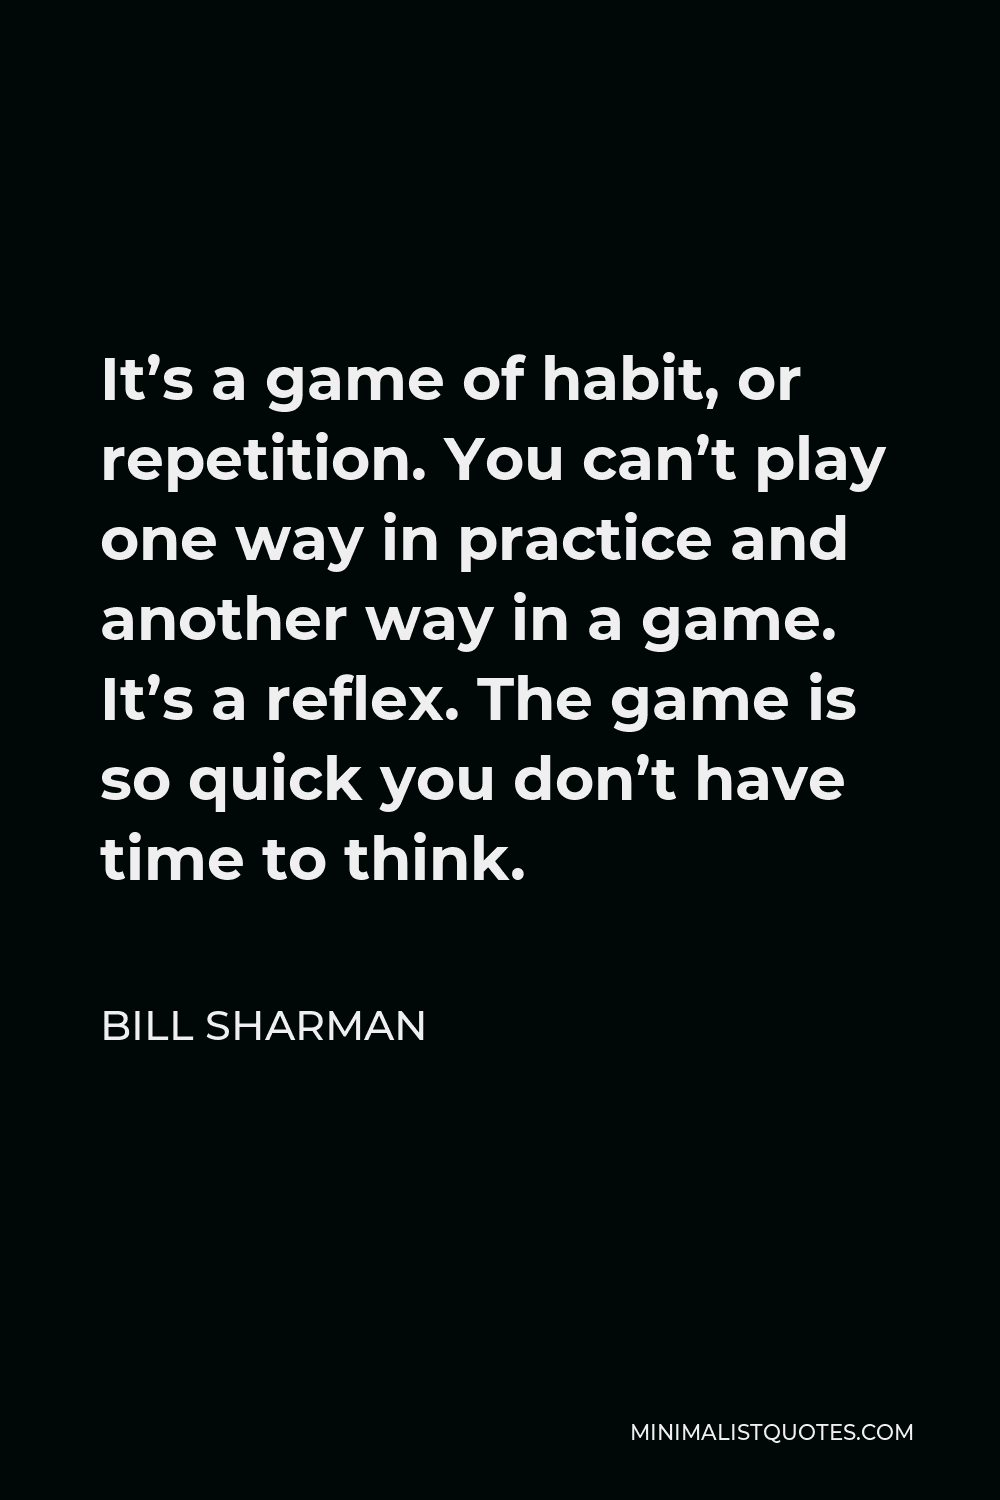 Bill Sharman Quote - It’s a game of habit, or repetition. You can’t play one way in practice and another way in a game. It’s a reflex. The game is so quick you don’t have time to think.